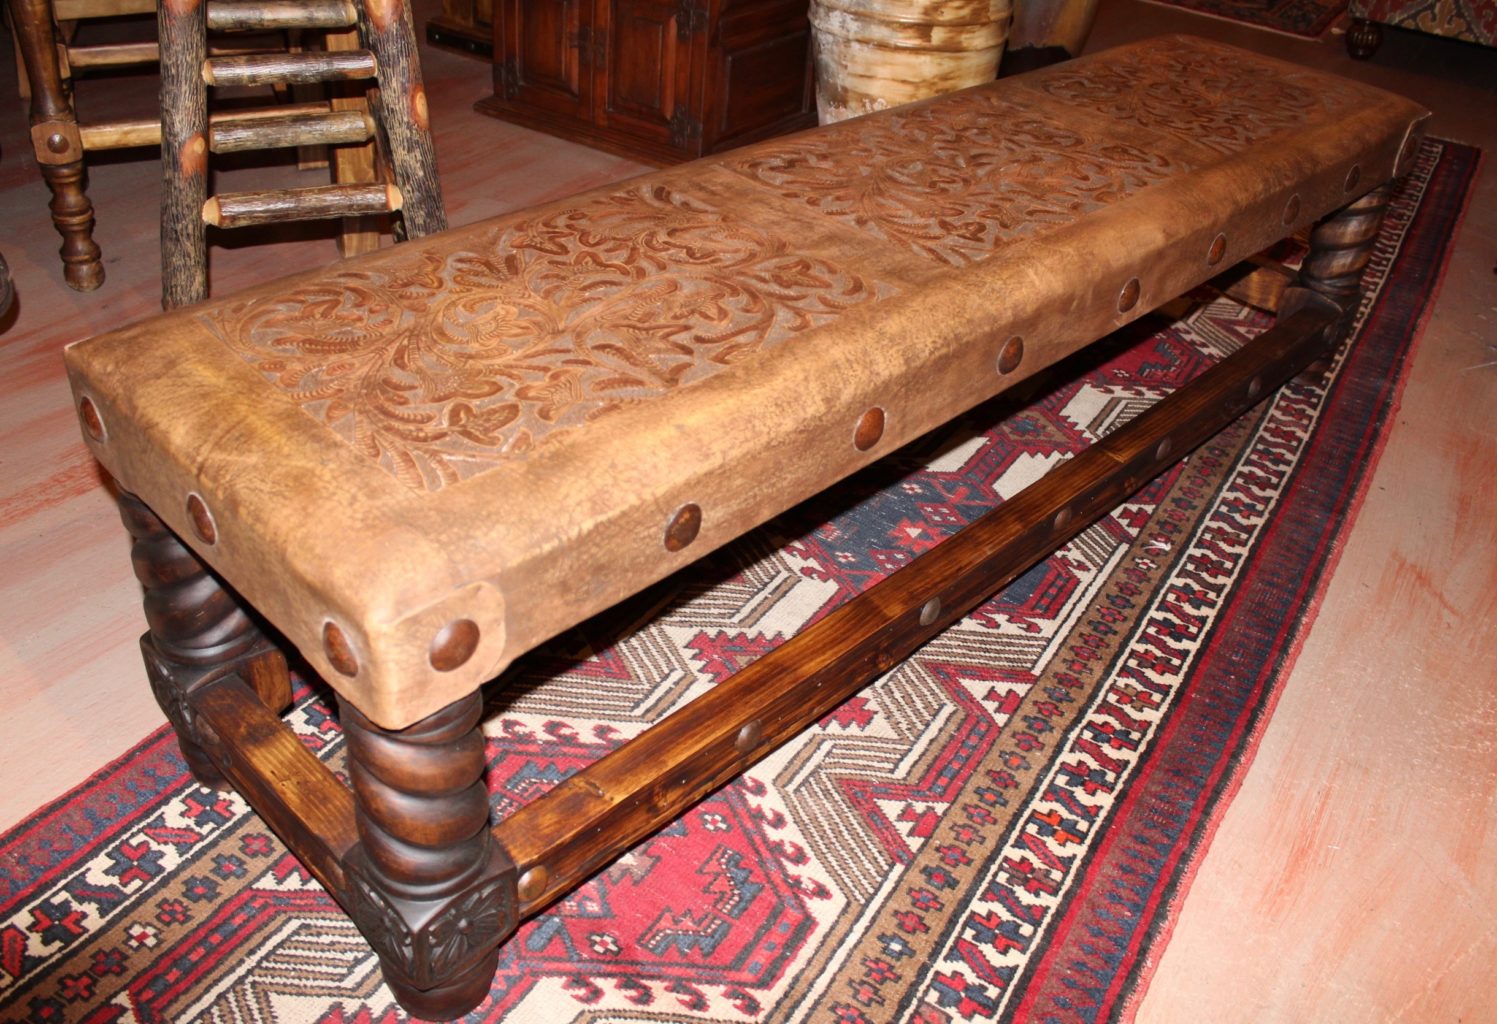 Rey Salomon Tooled Leather Backless Bench in Café